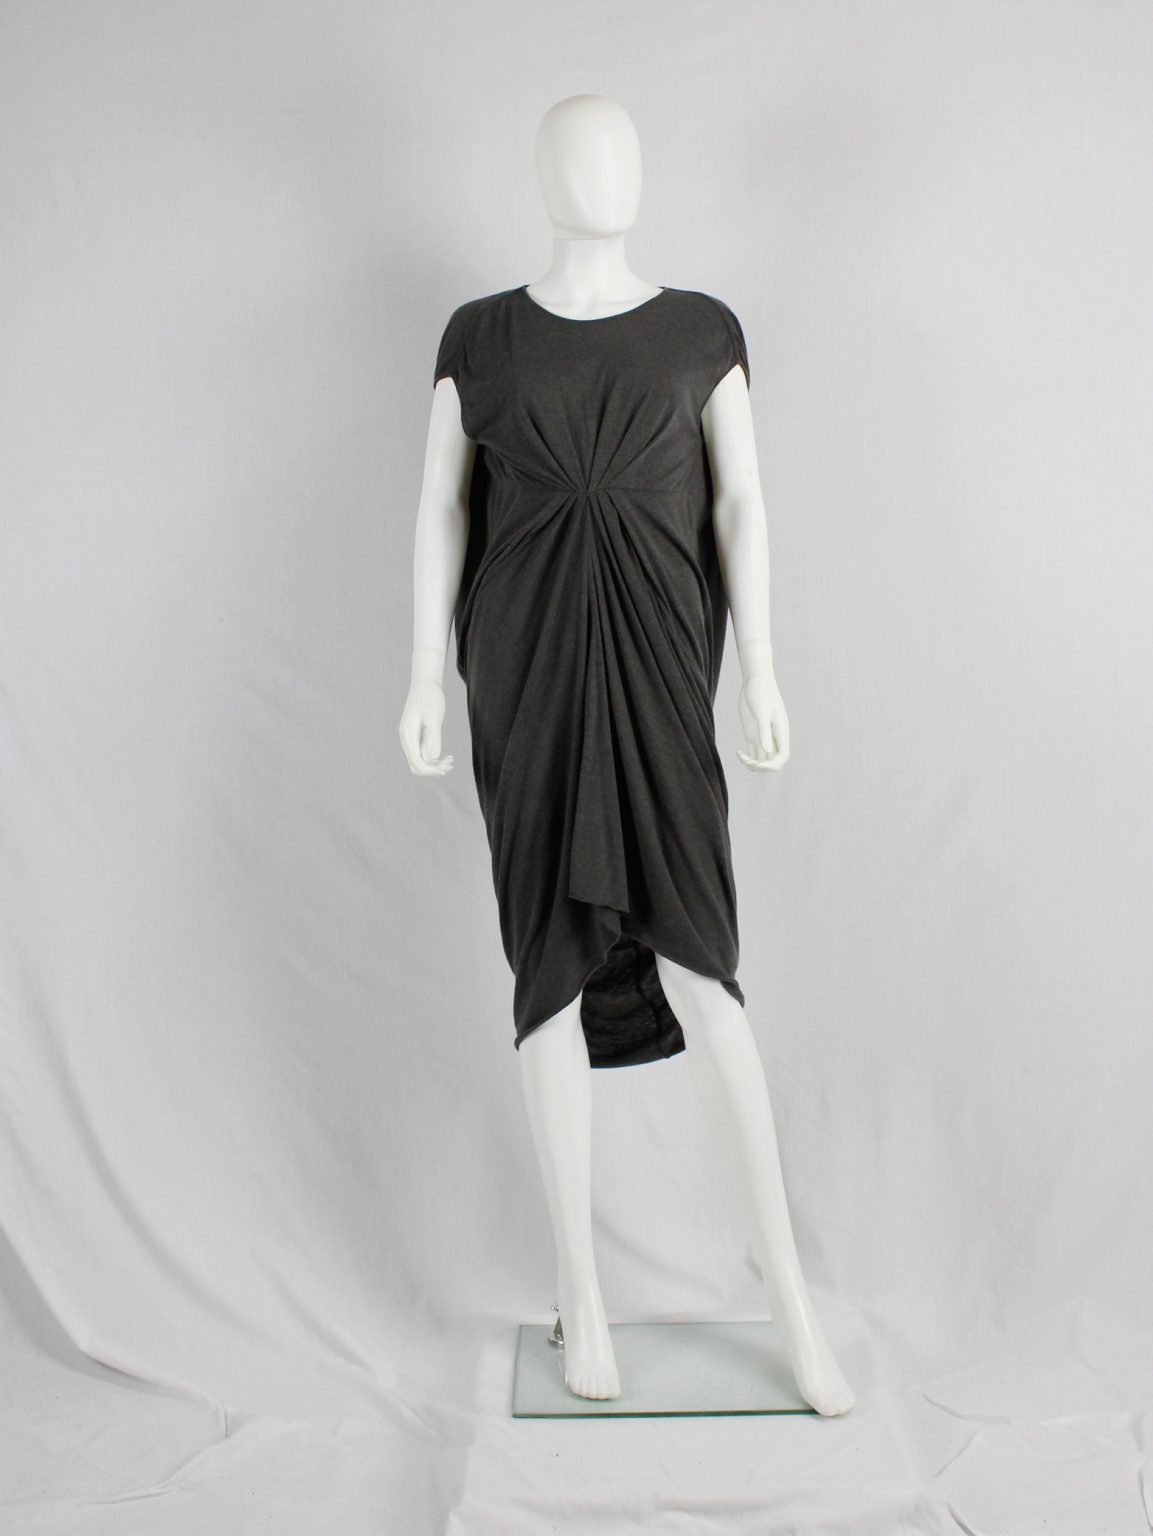 Rick Owens lilies brown 'lobster' dress with gathered front and draped back